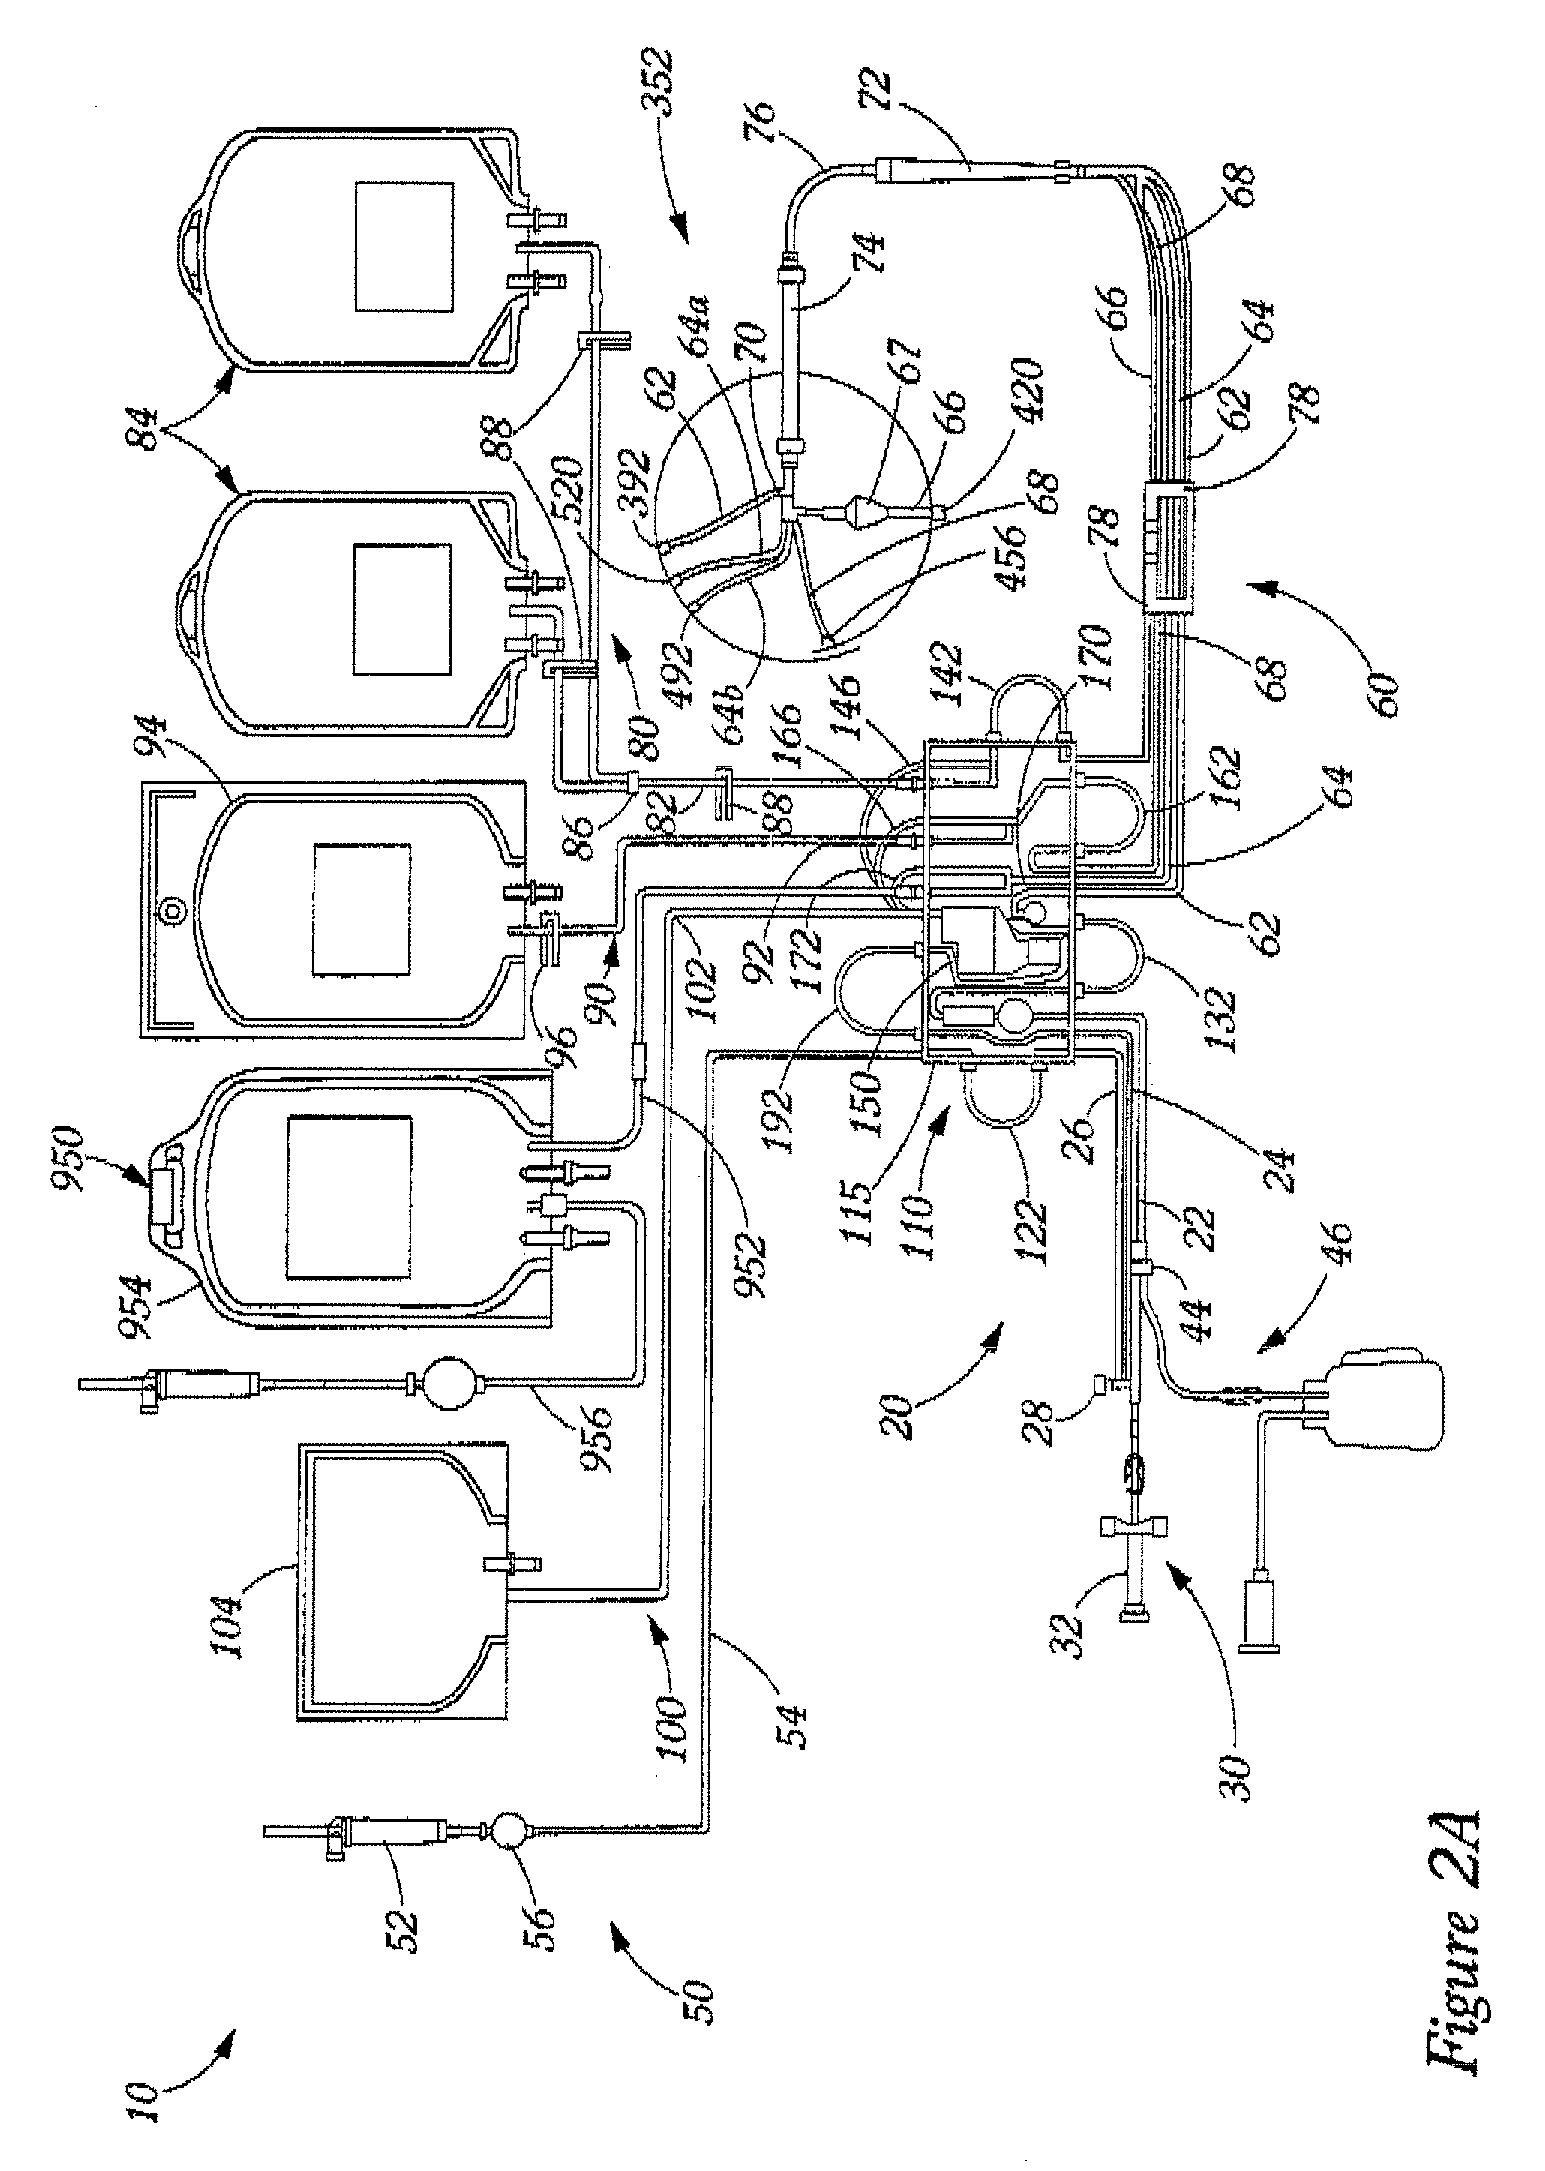 Extracorporeal blood processing methods with return-flow alarm